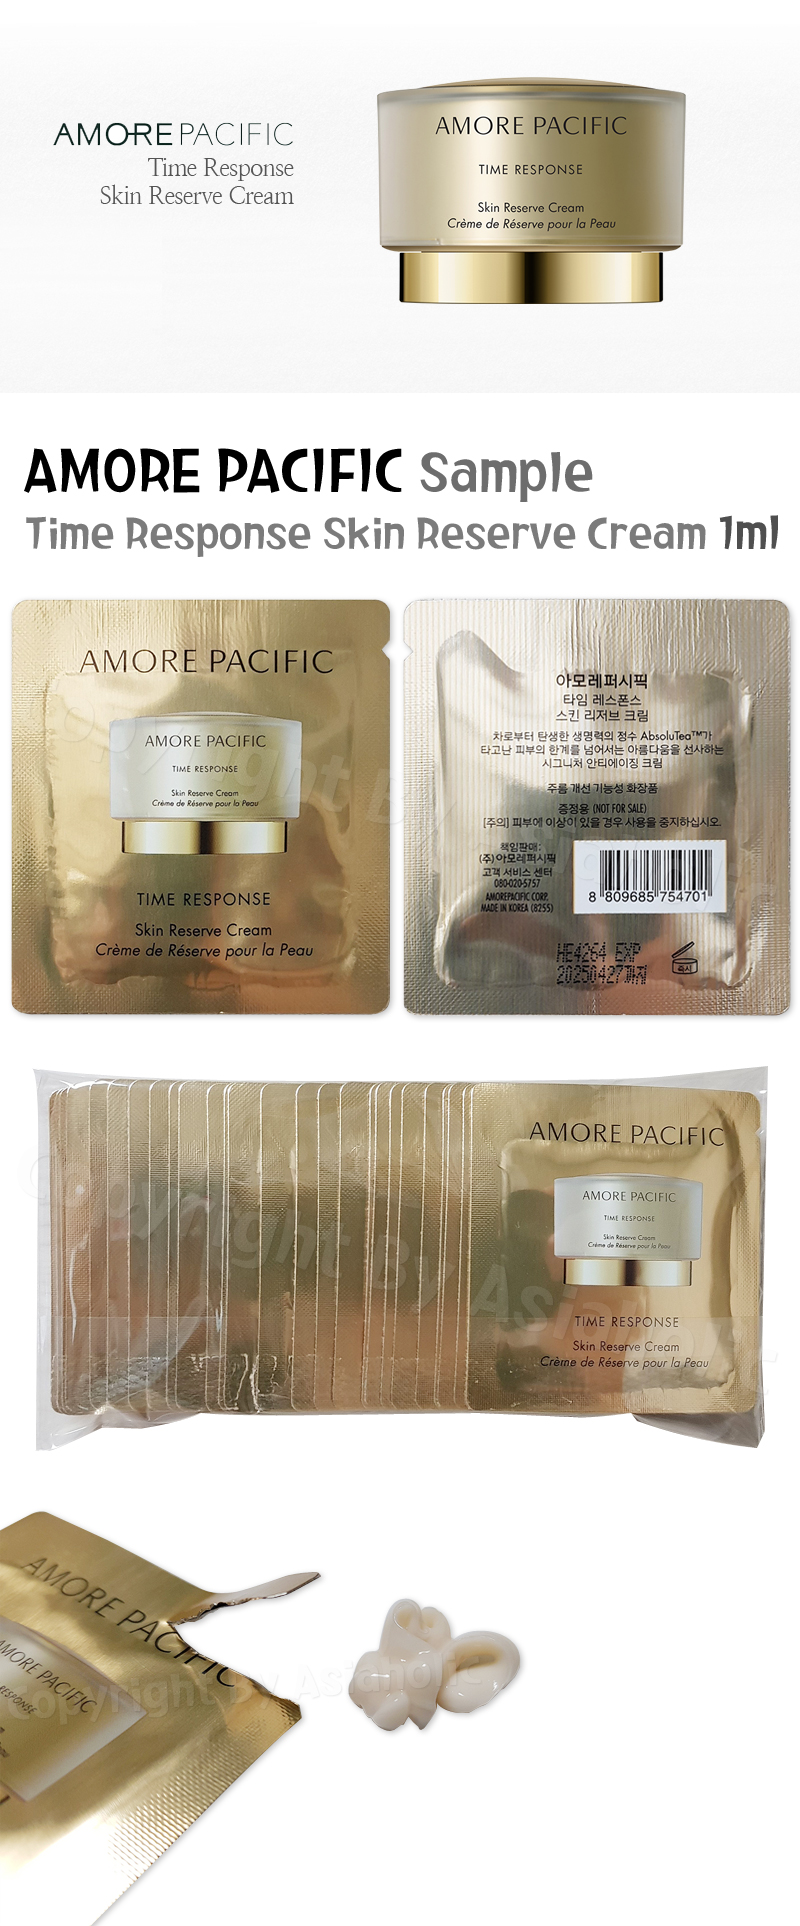 AMORE PACIFIC Time Response Skin Reserve Cream 1ml x 10pcs (10ml) Sample Newest Version